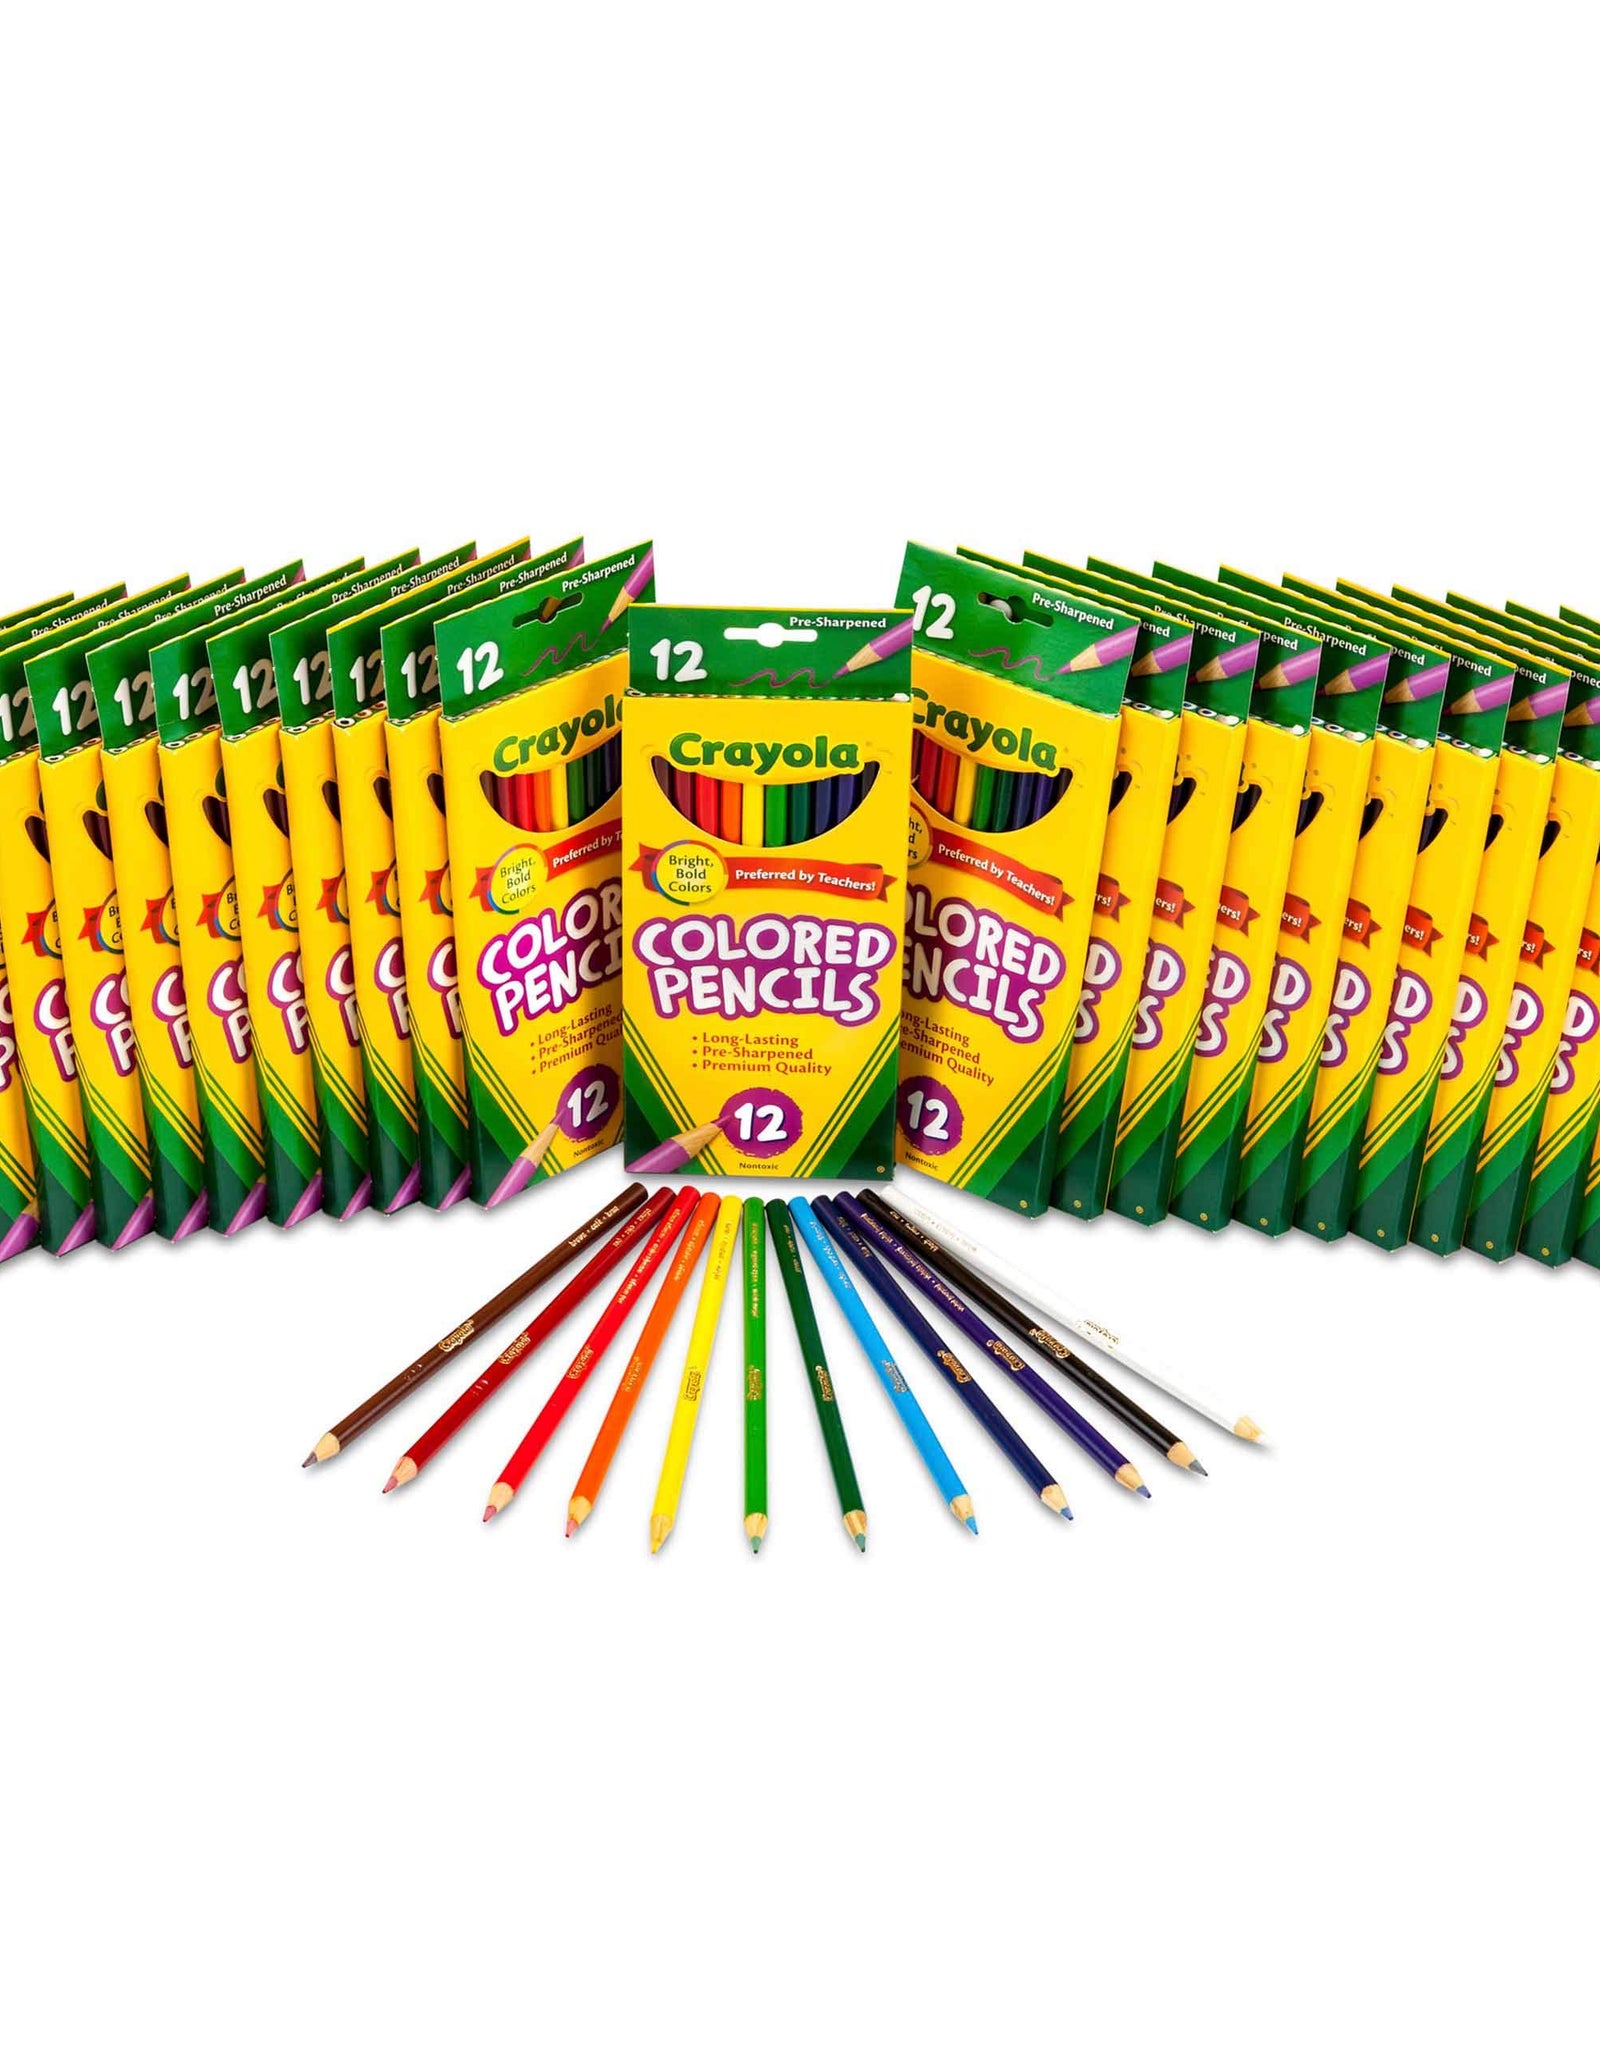 Crayola Bulk Colored Pencils, Pre-sharpened, 12 Assorted Colors, Pack of 24